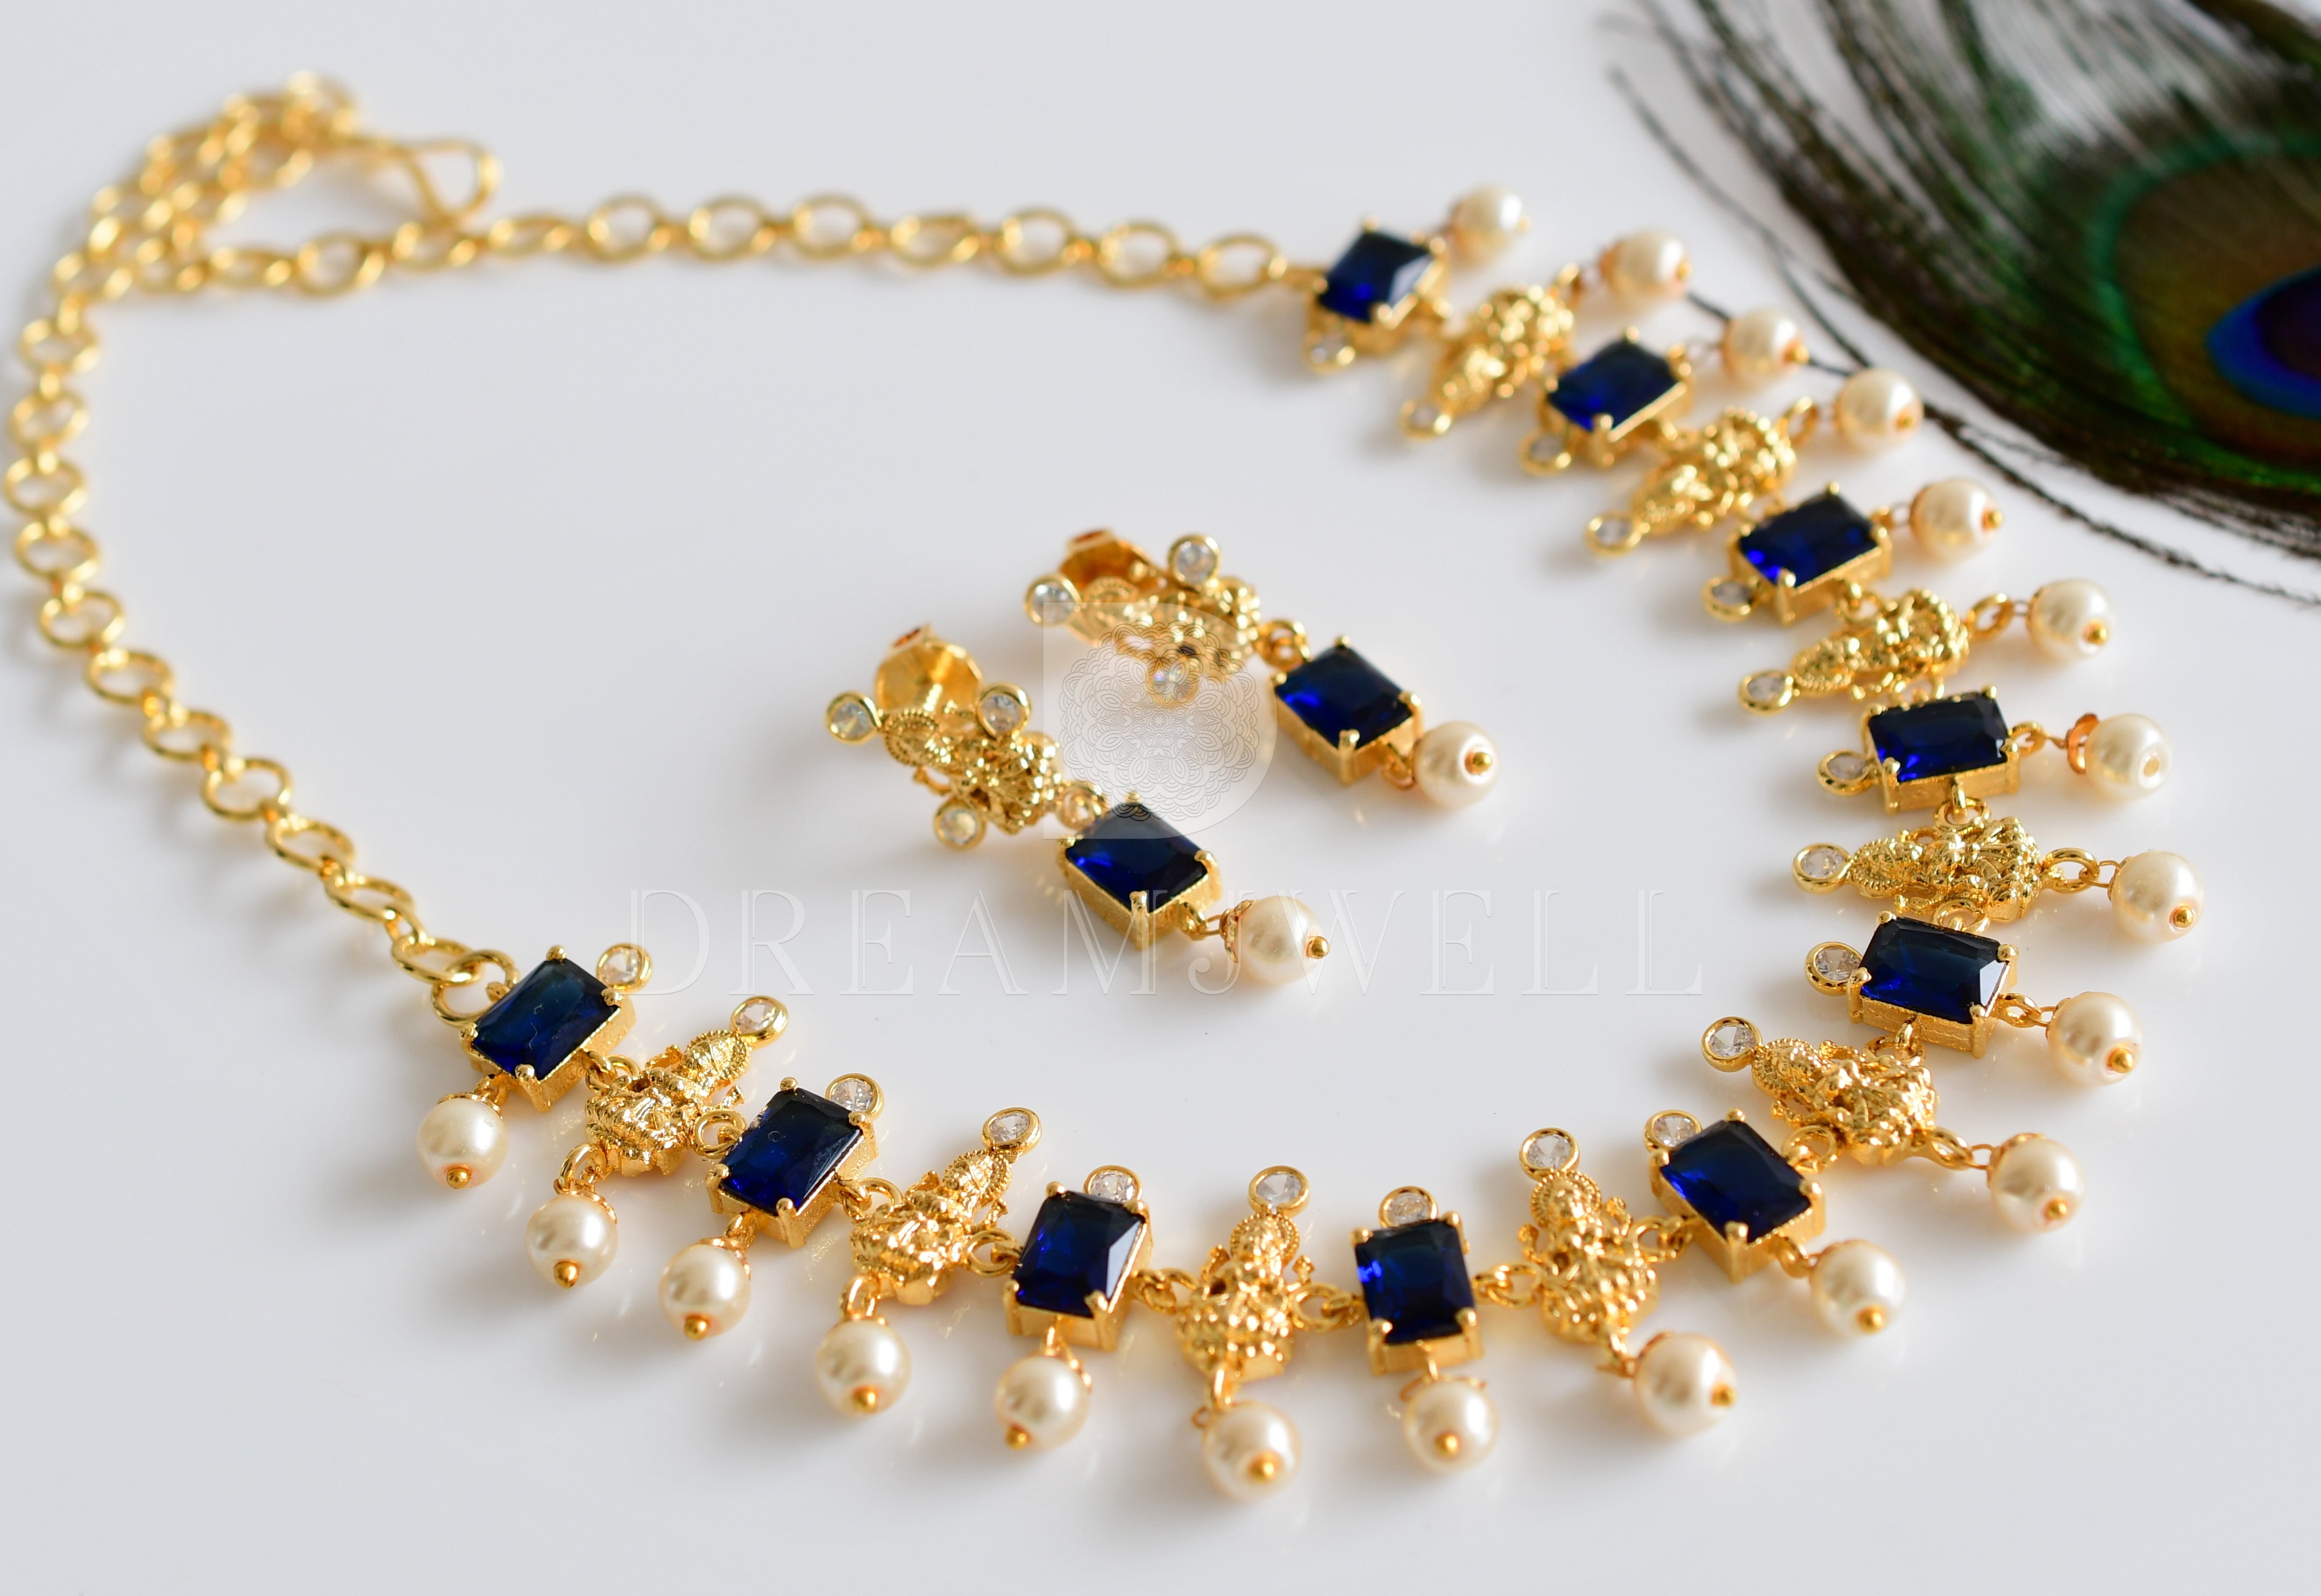 Amazon.com: Blue Opal Hamsa on a Gold Filled Choker Necklace- Handmade  Dainty Hand of Fatima Collar - 13.5 + 3 inch extending (royal blue, gold  filled) : Handmade Products